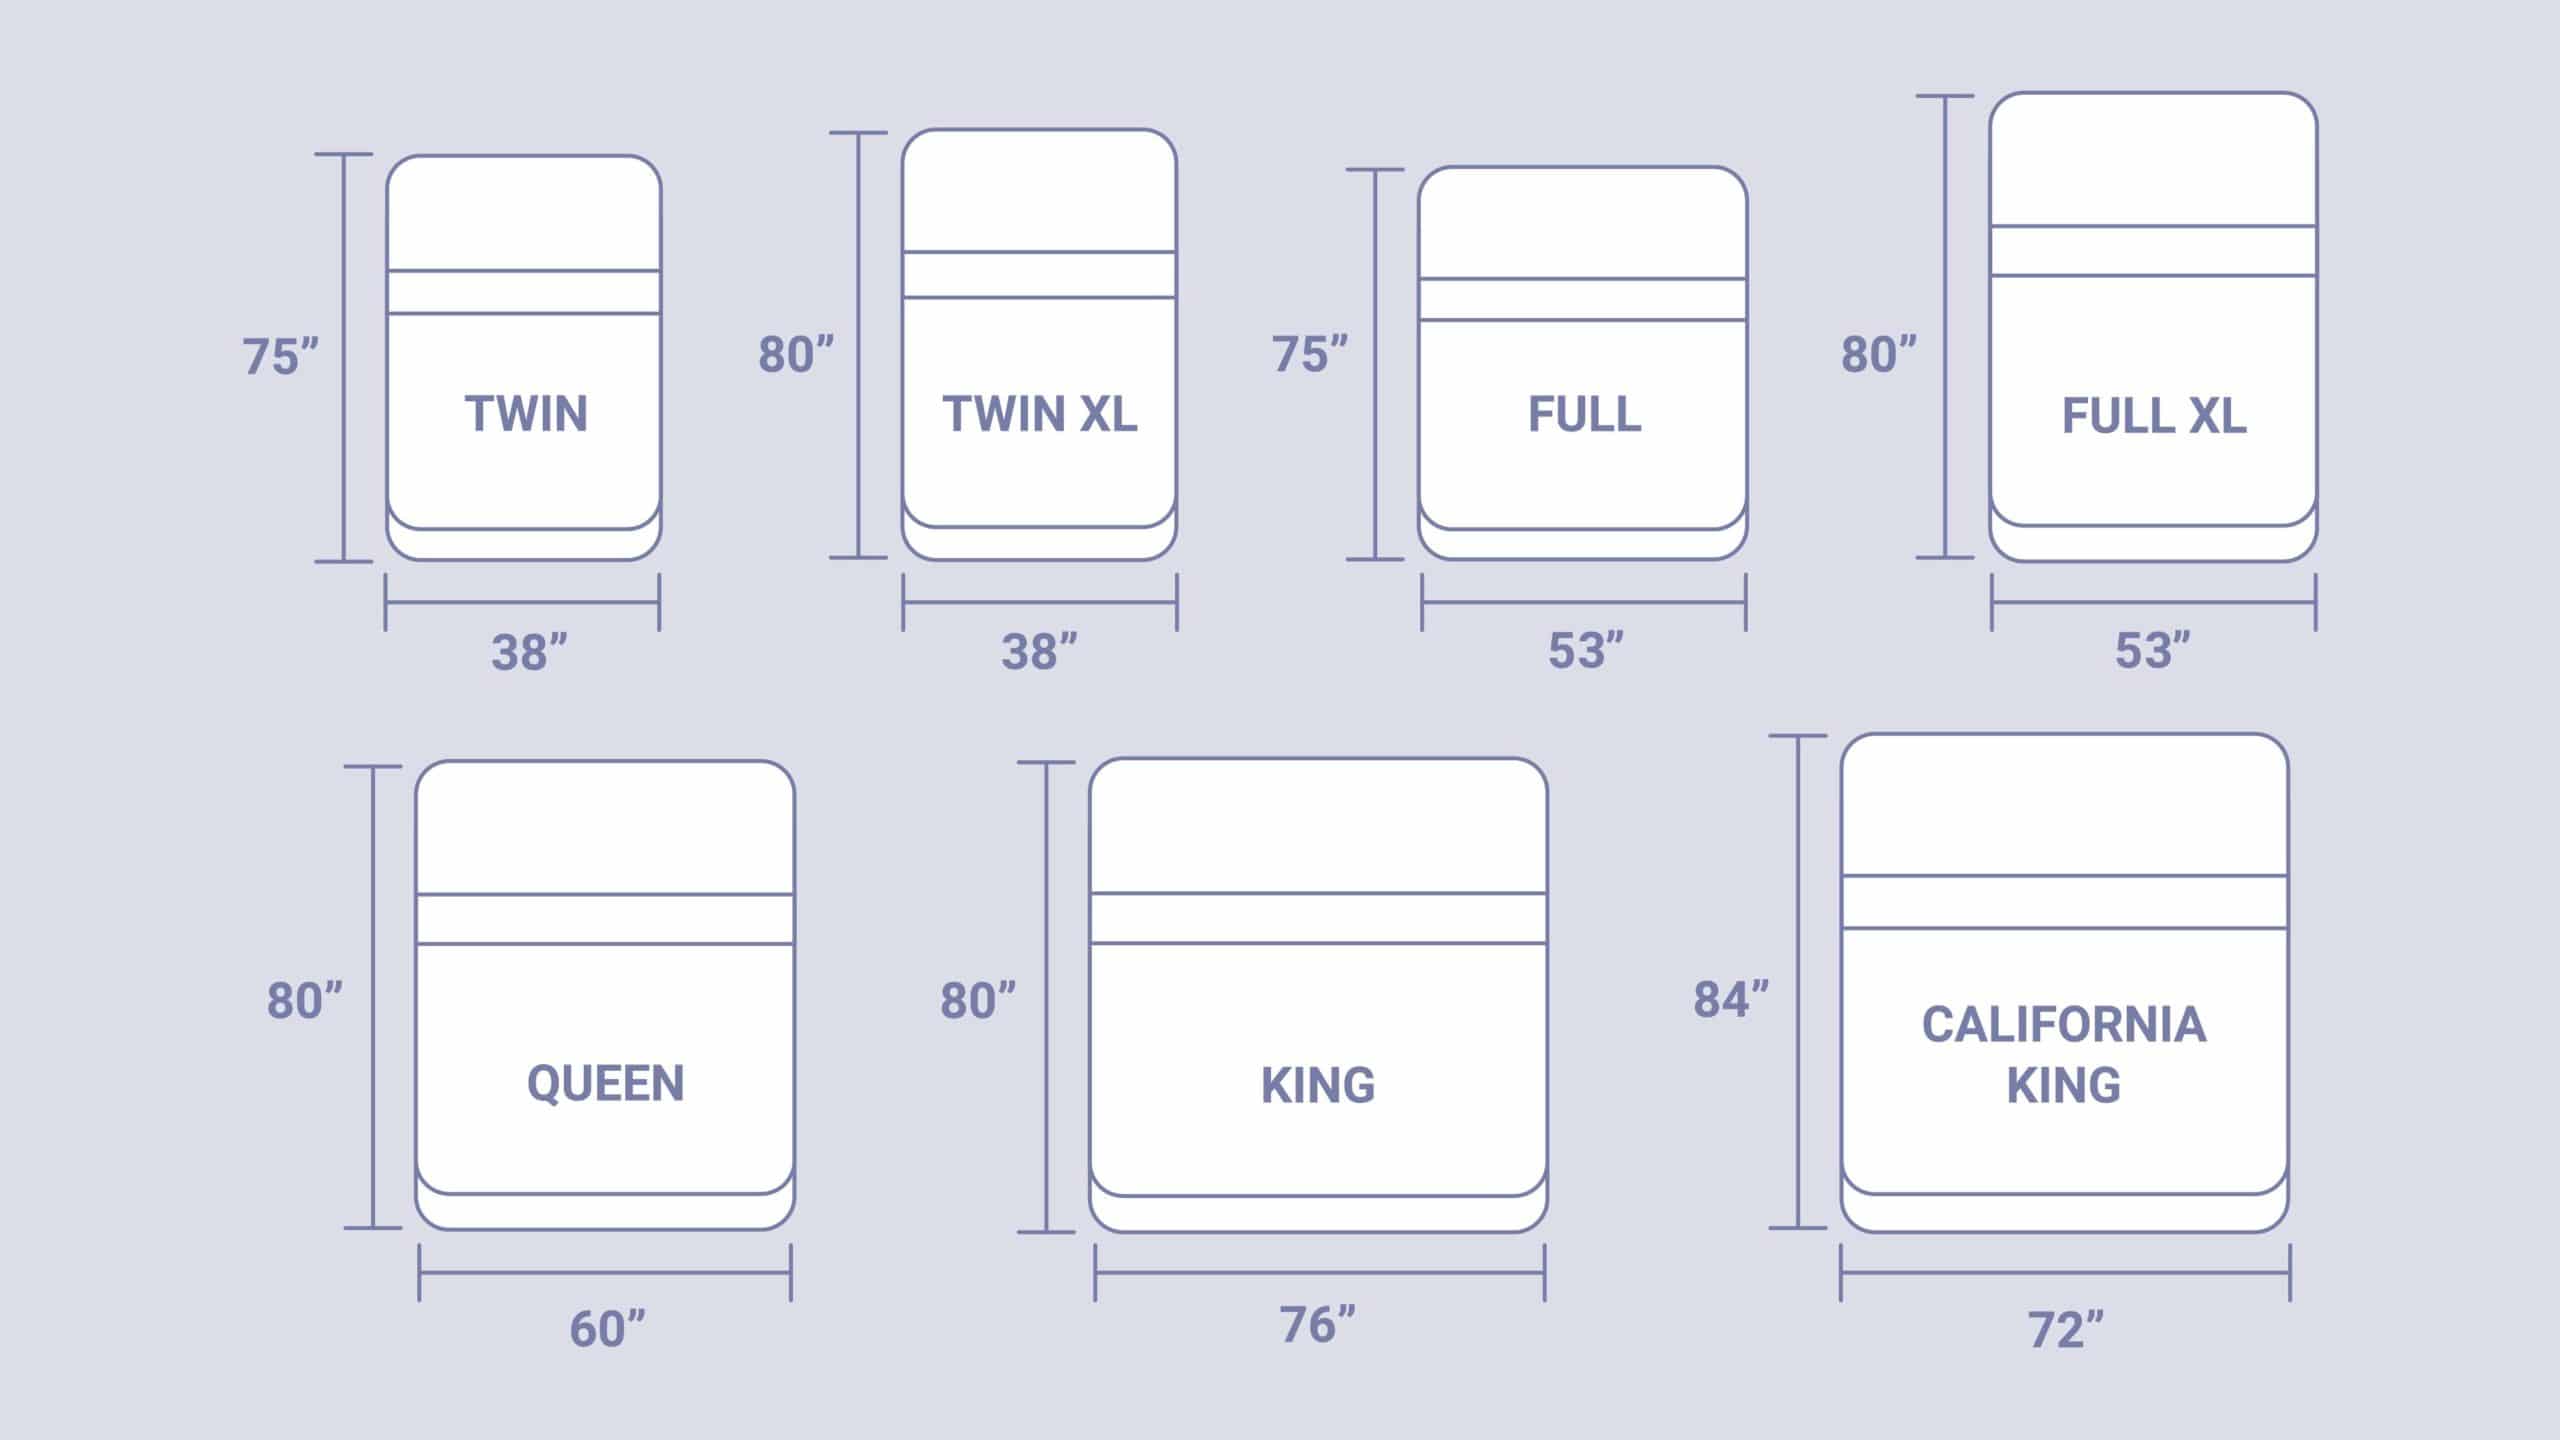 Mattress Sizes And Dimensions Guide, Bed Dimensions Full Queen